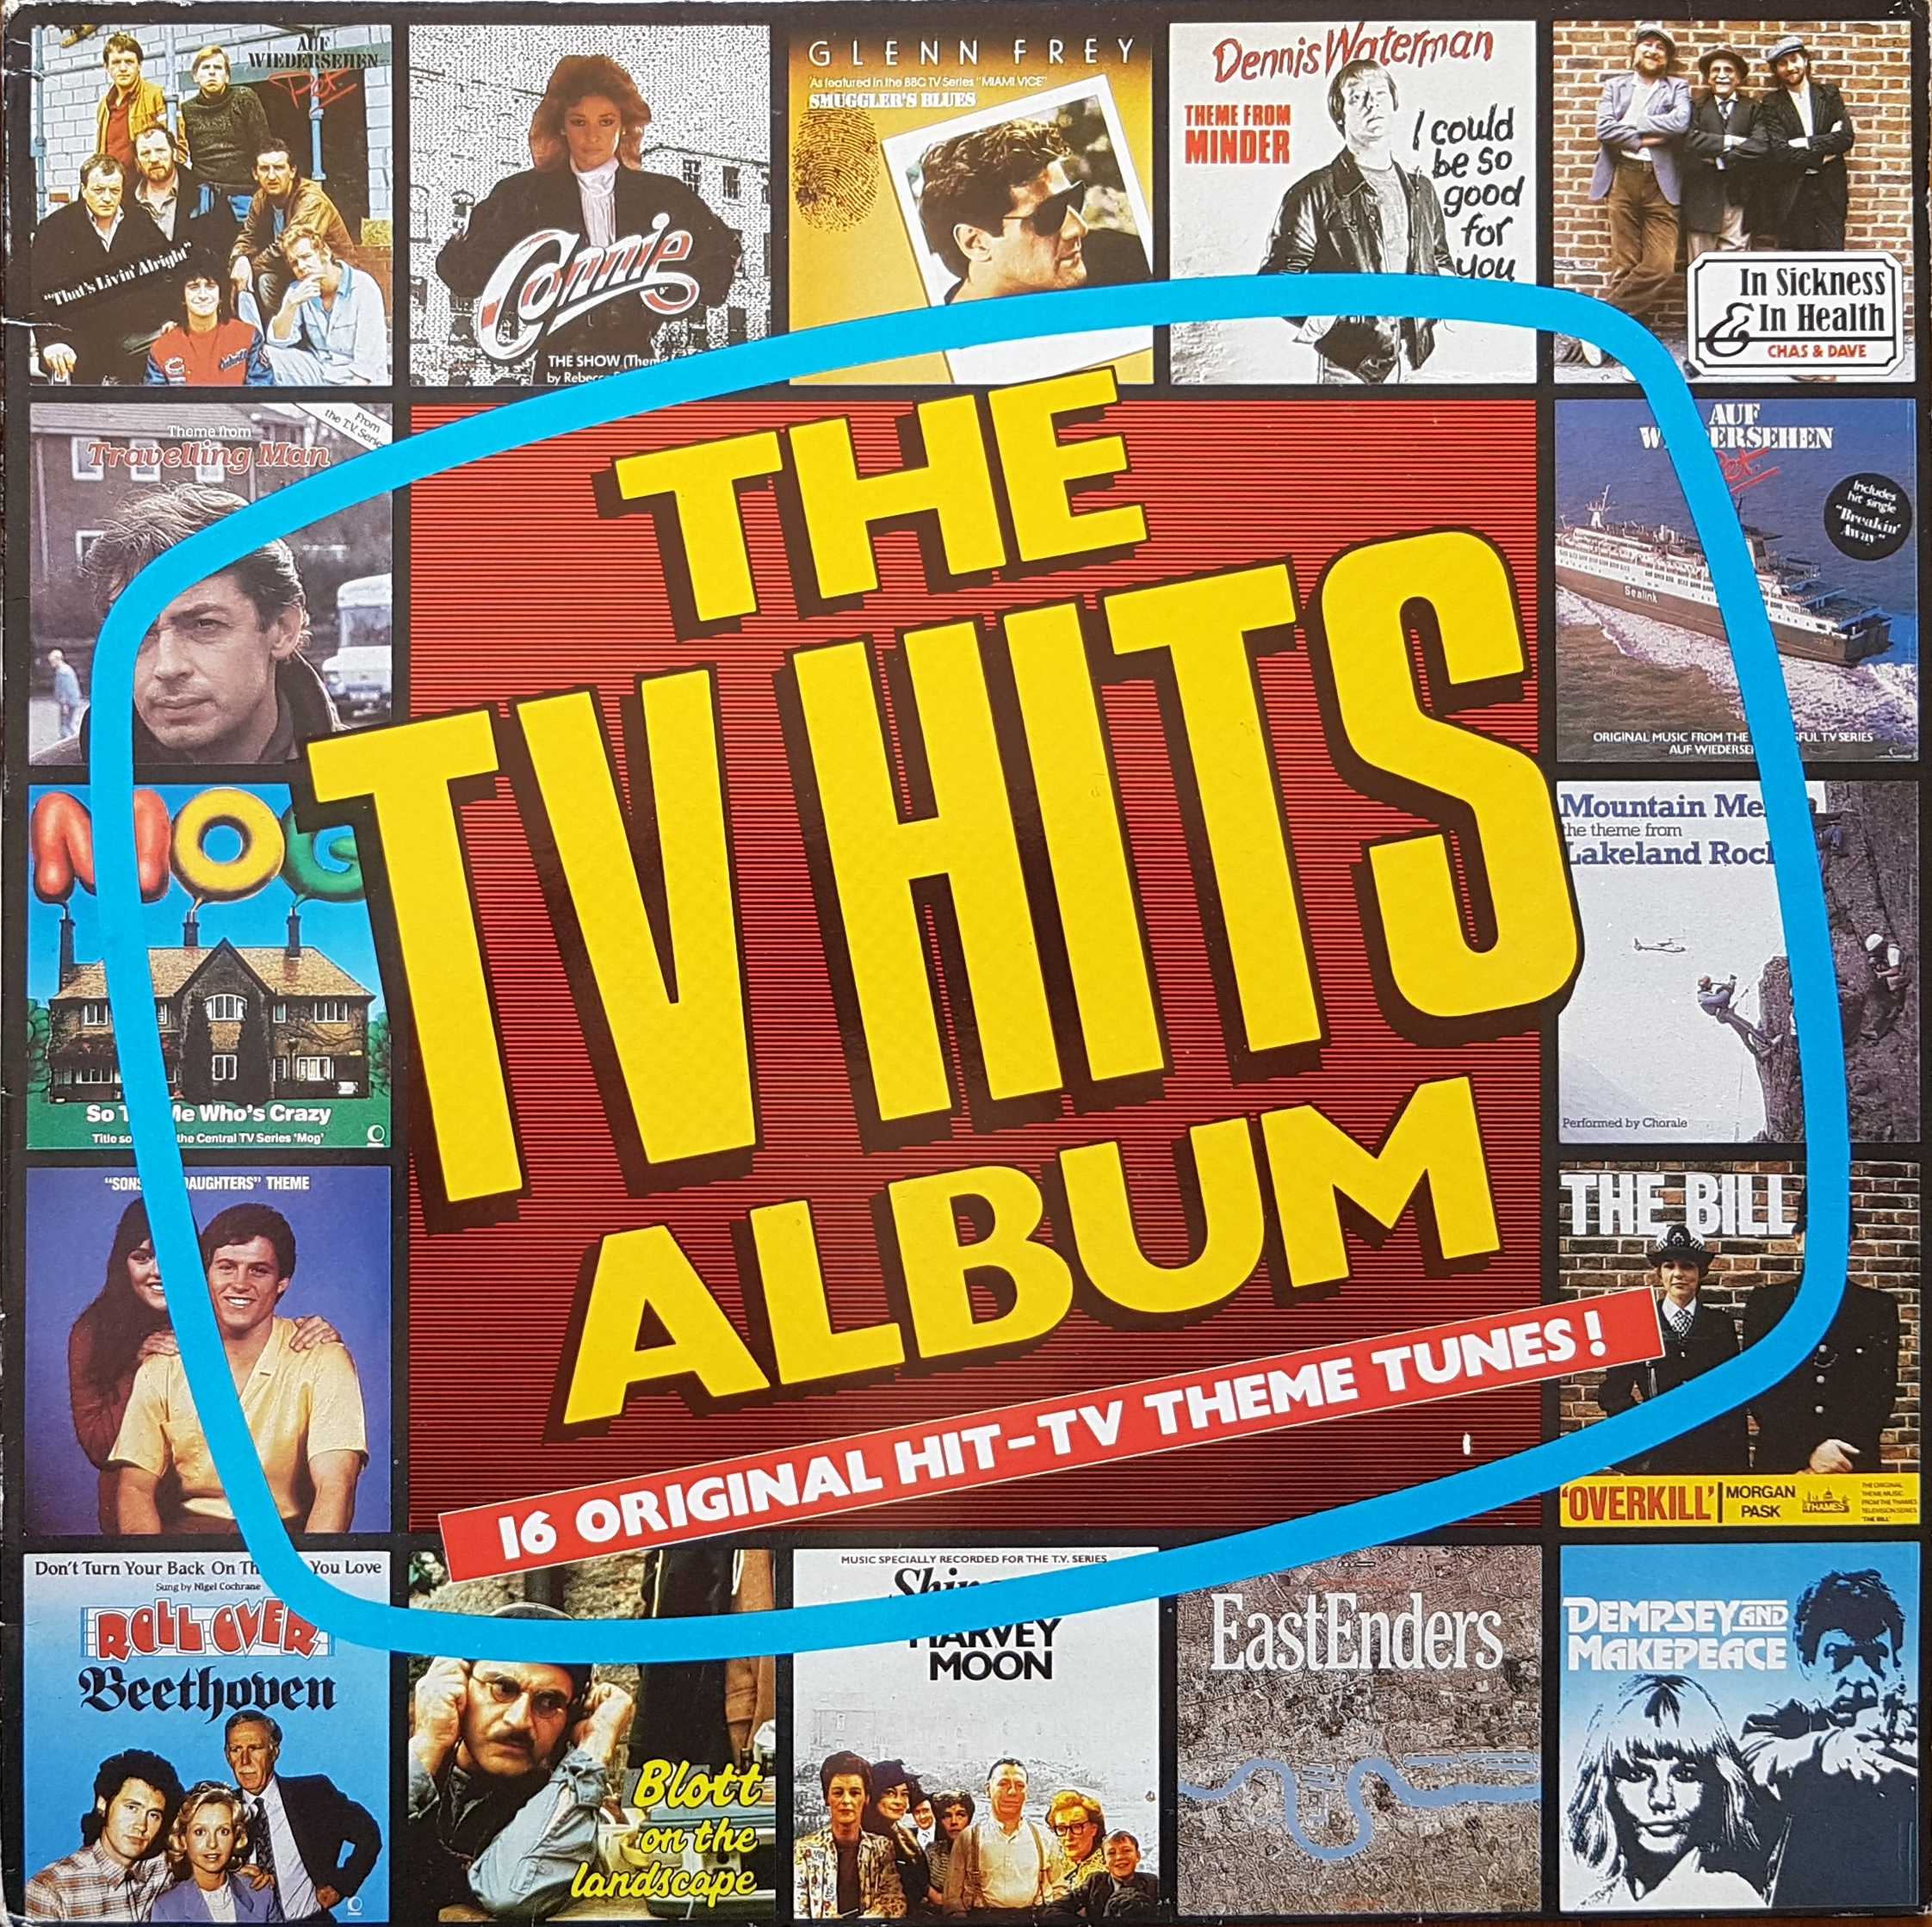 Picture of The TV hits album by artist Various from ITV, Channel 4 and Channel 5 albums library